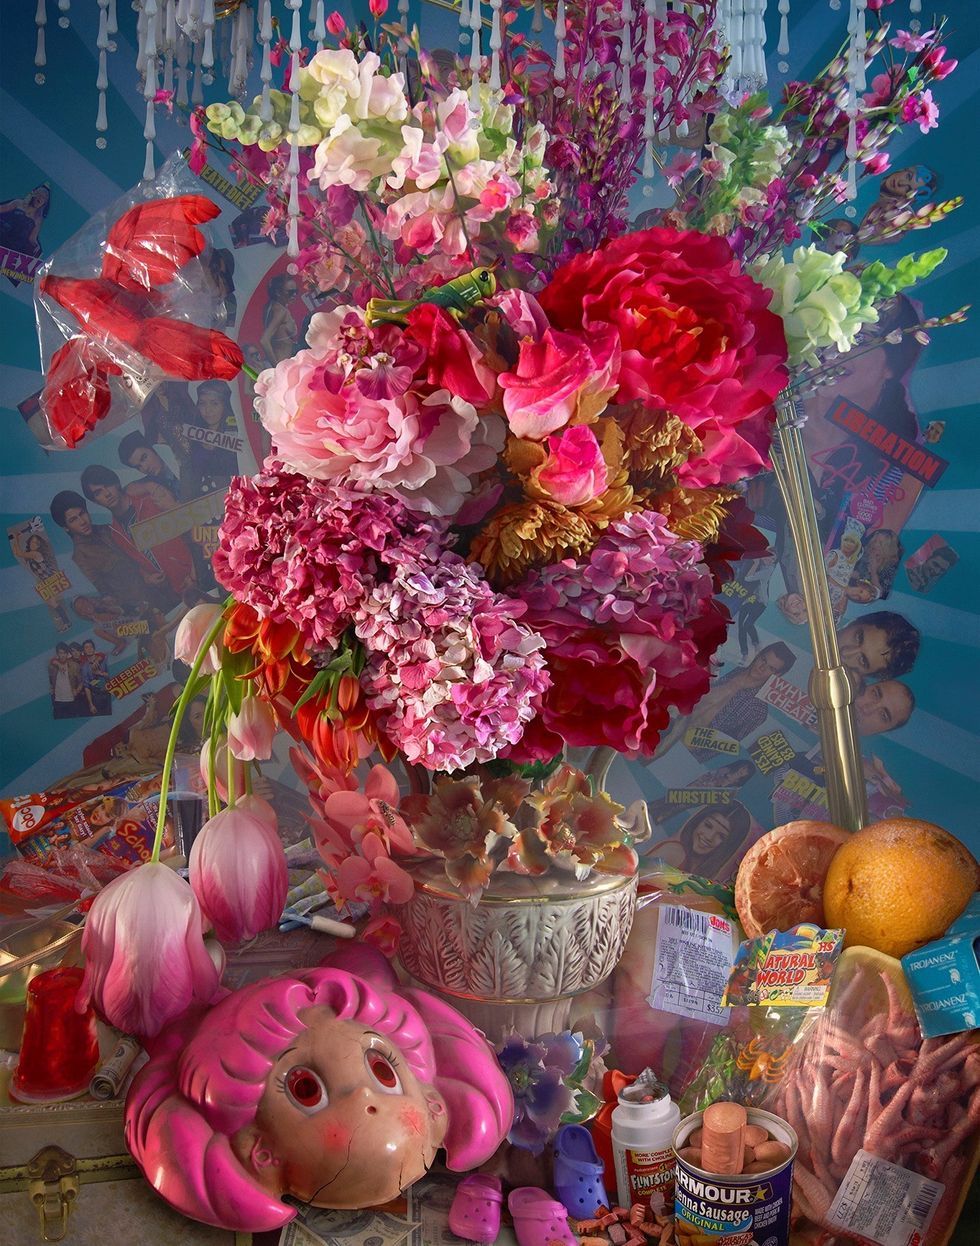 David LaChapelle, Earth Laughs in Flowers